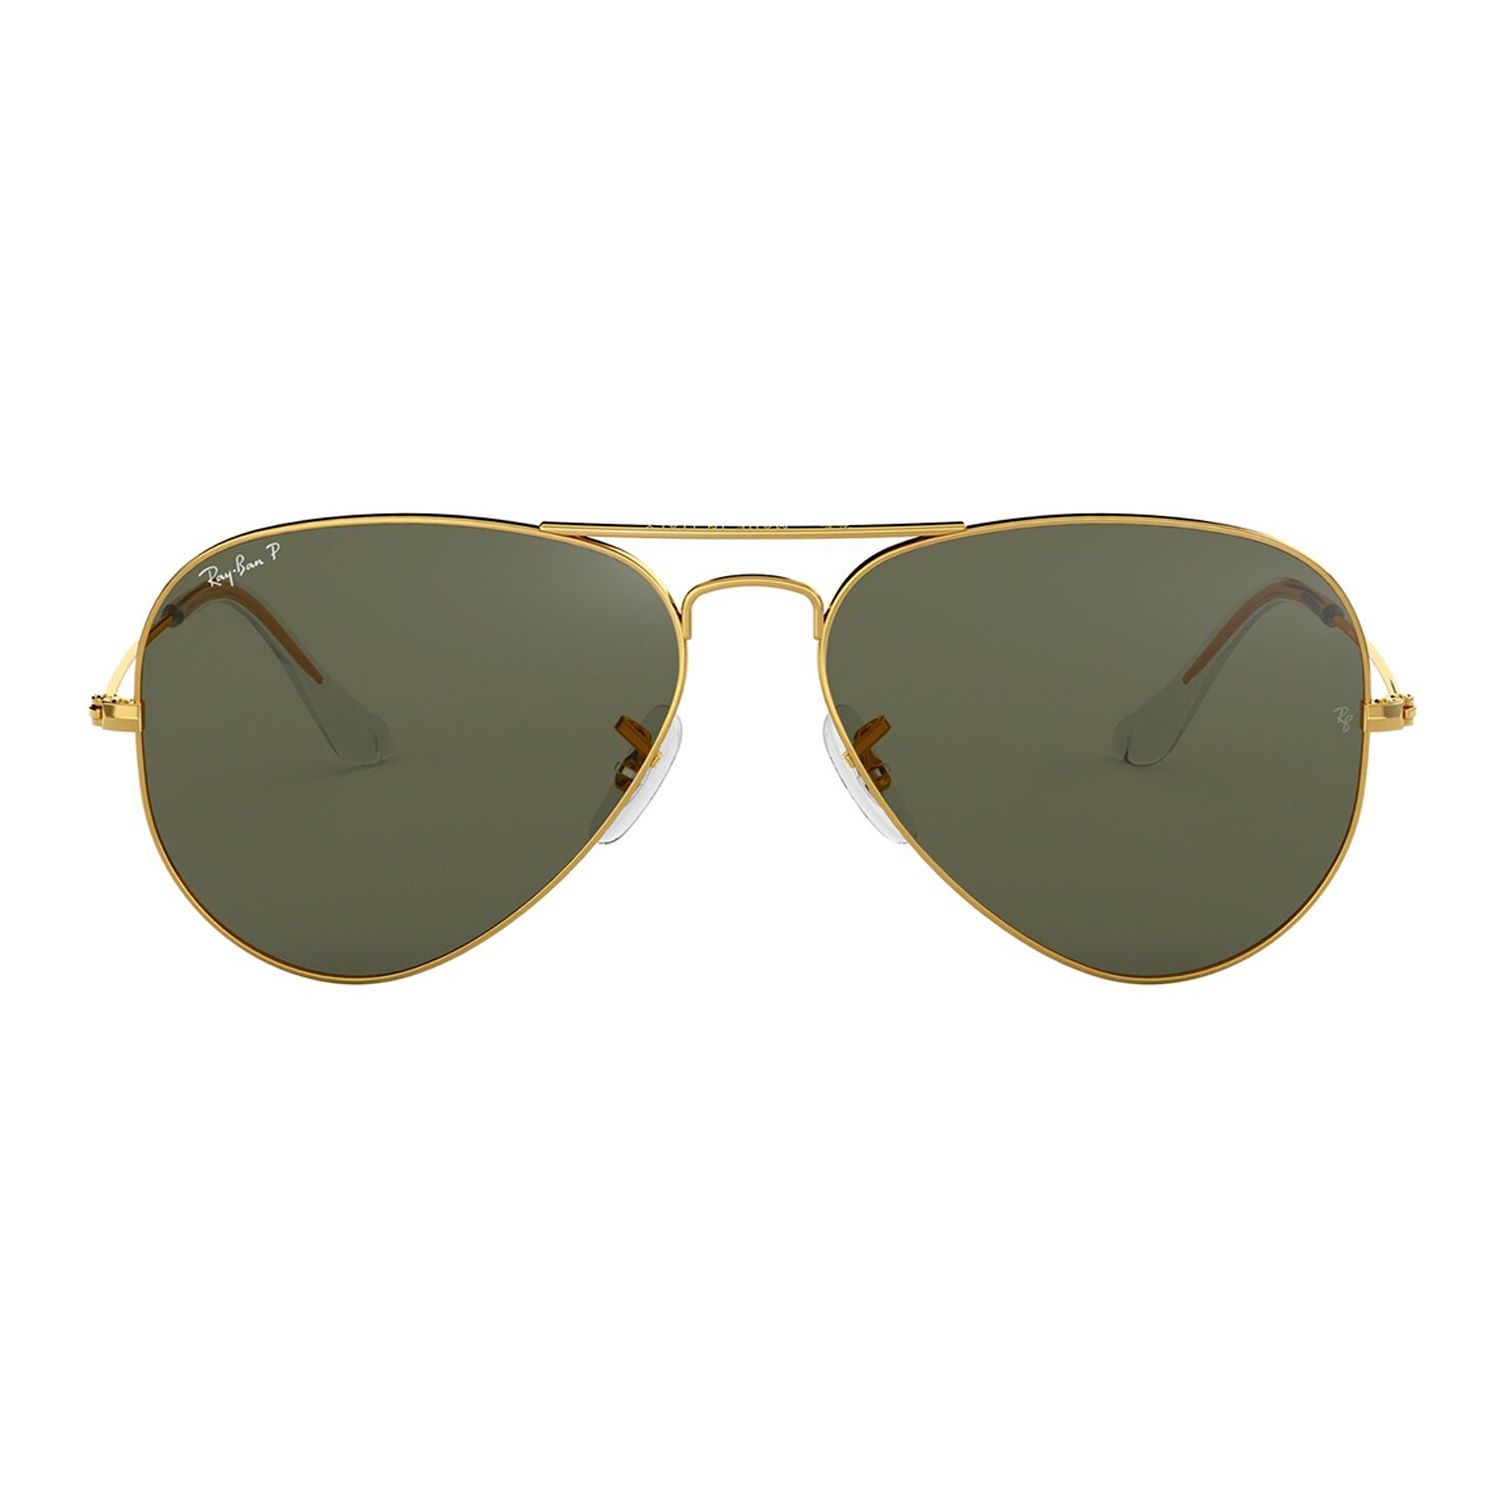 Ray Ban Sunglasses Shop For Stylish Everyday Accessories Kohl S